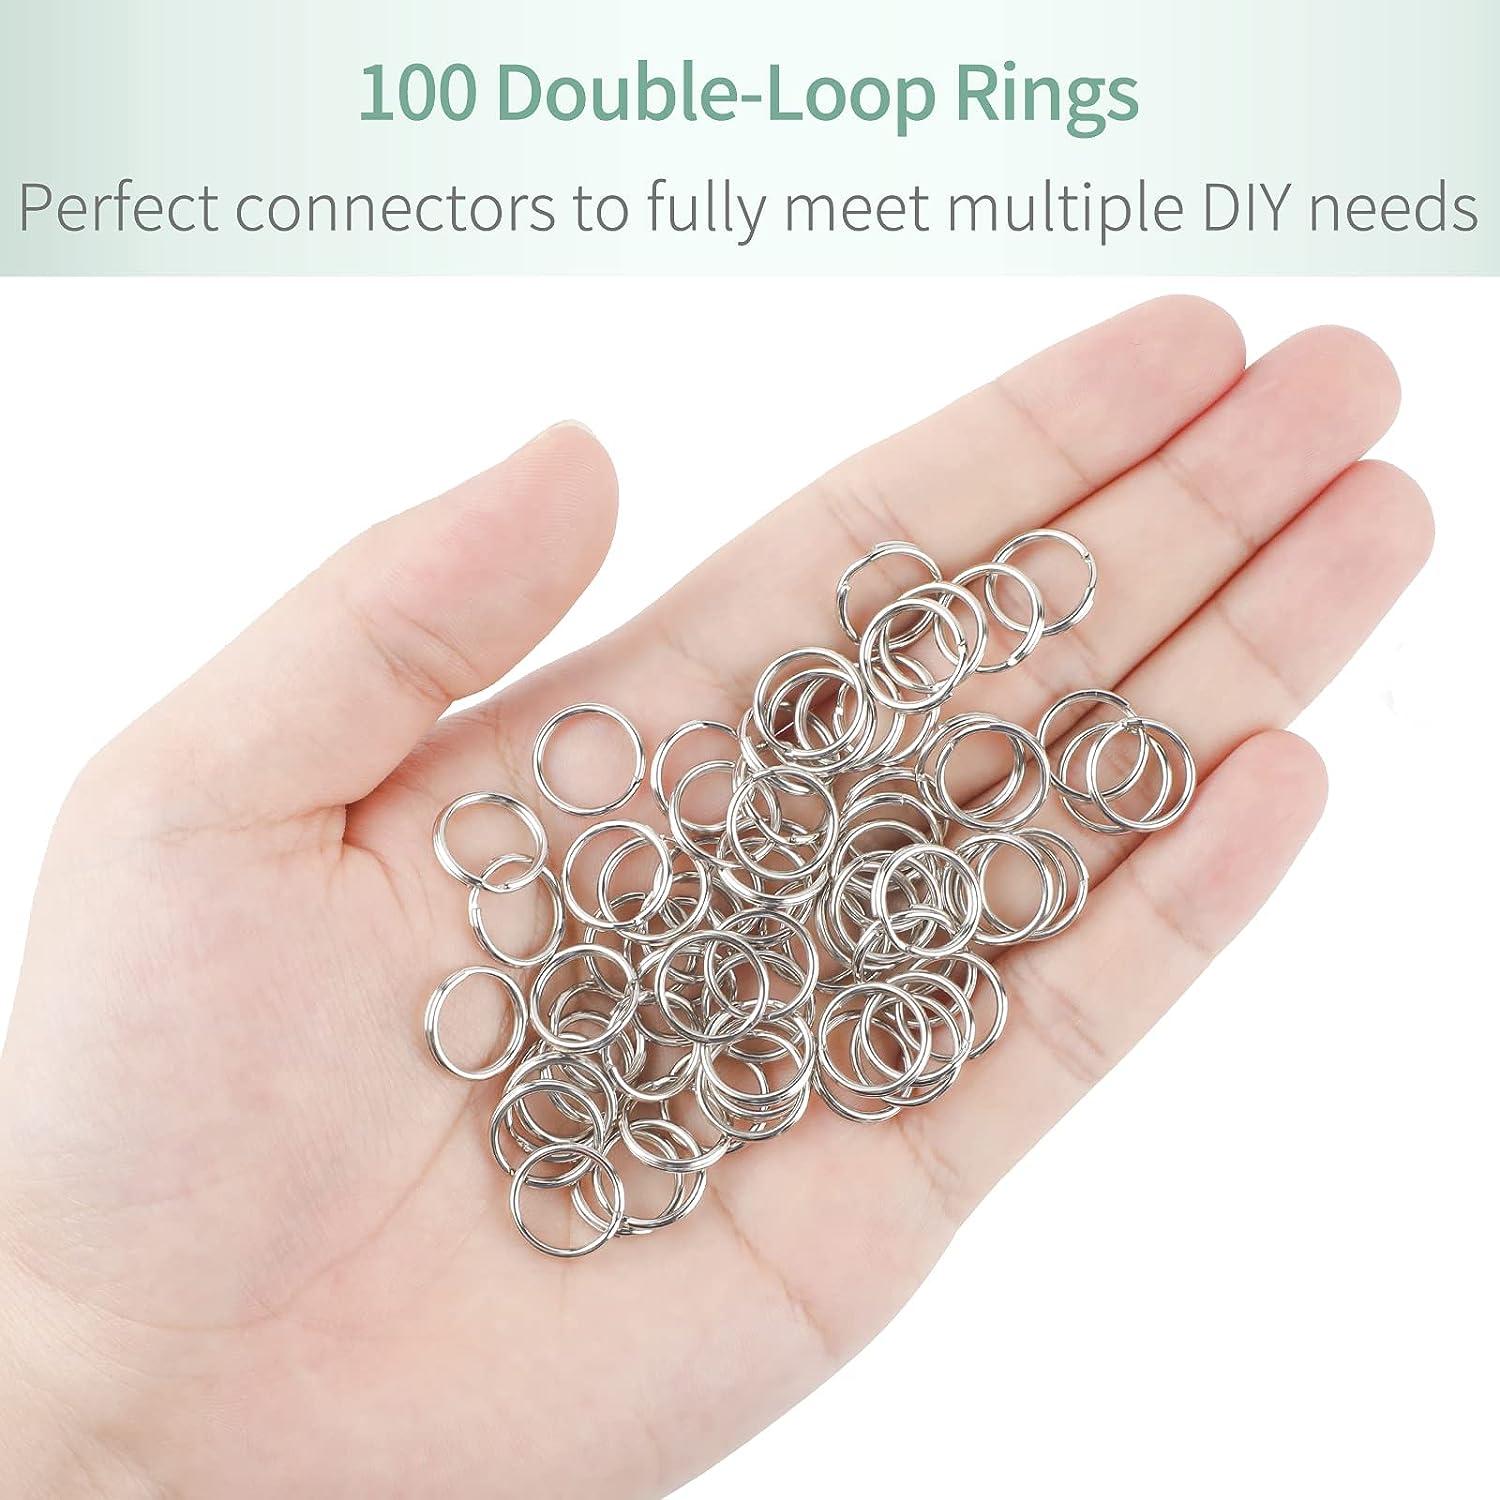 Aylifu 200pcs 2 Sizes Gold Plated Stainless Steel Split Rings Jump Ring Connectors Jewelry Connector Rings for Jewelry Making Bracelet Earrings